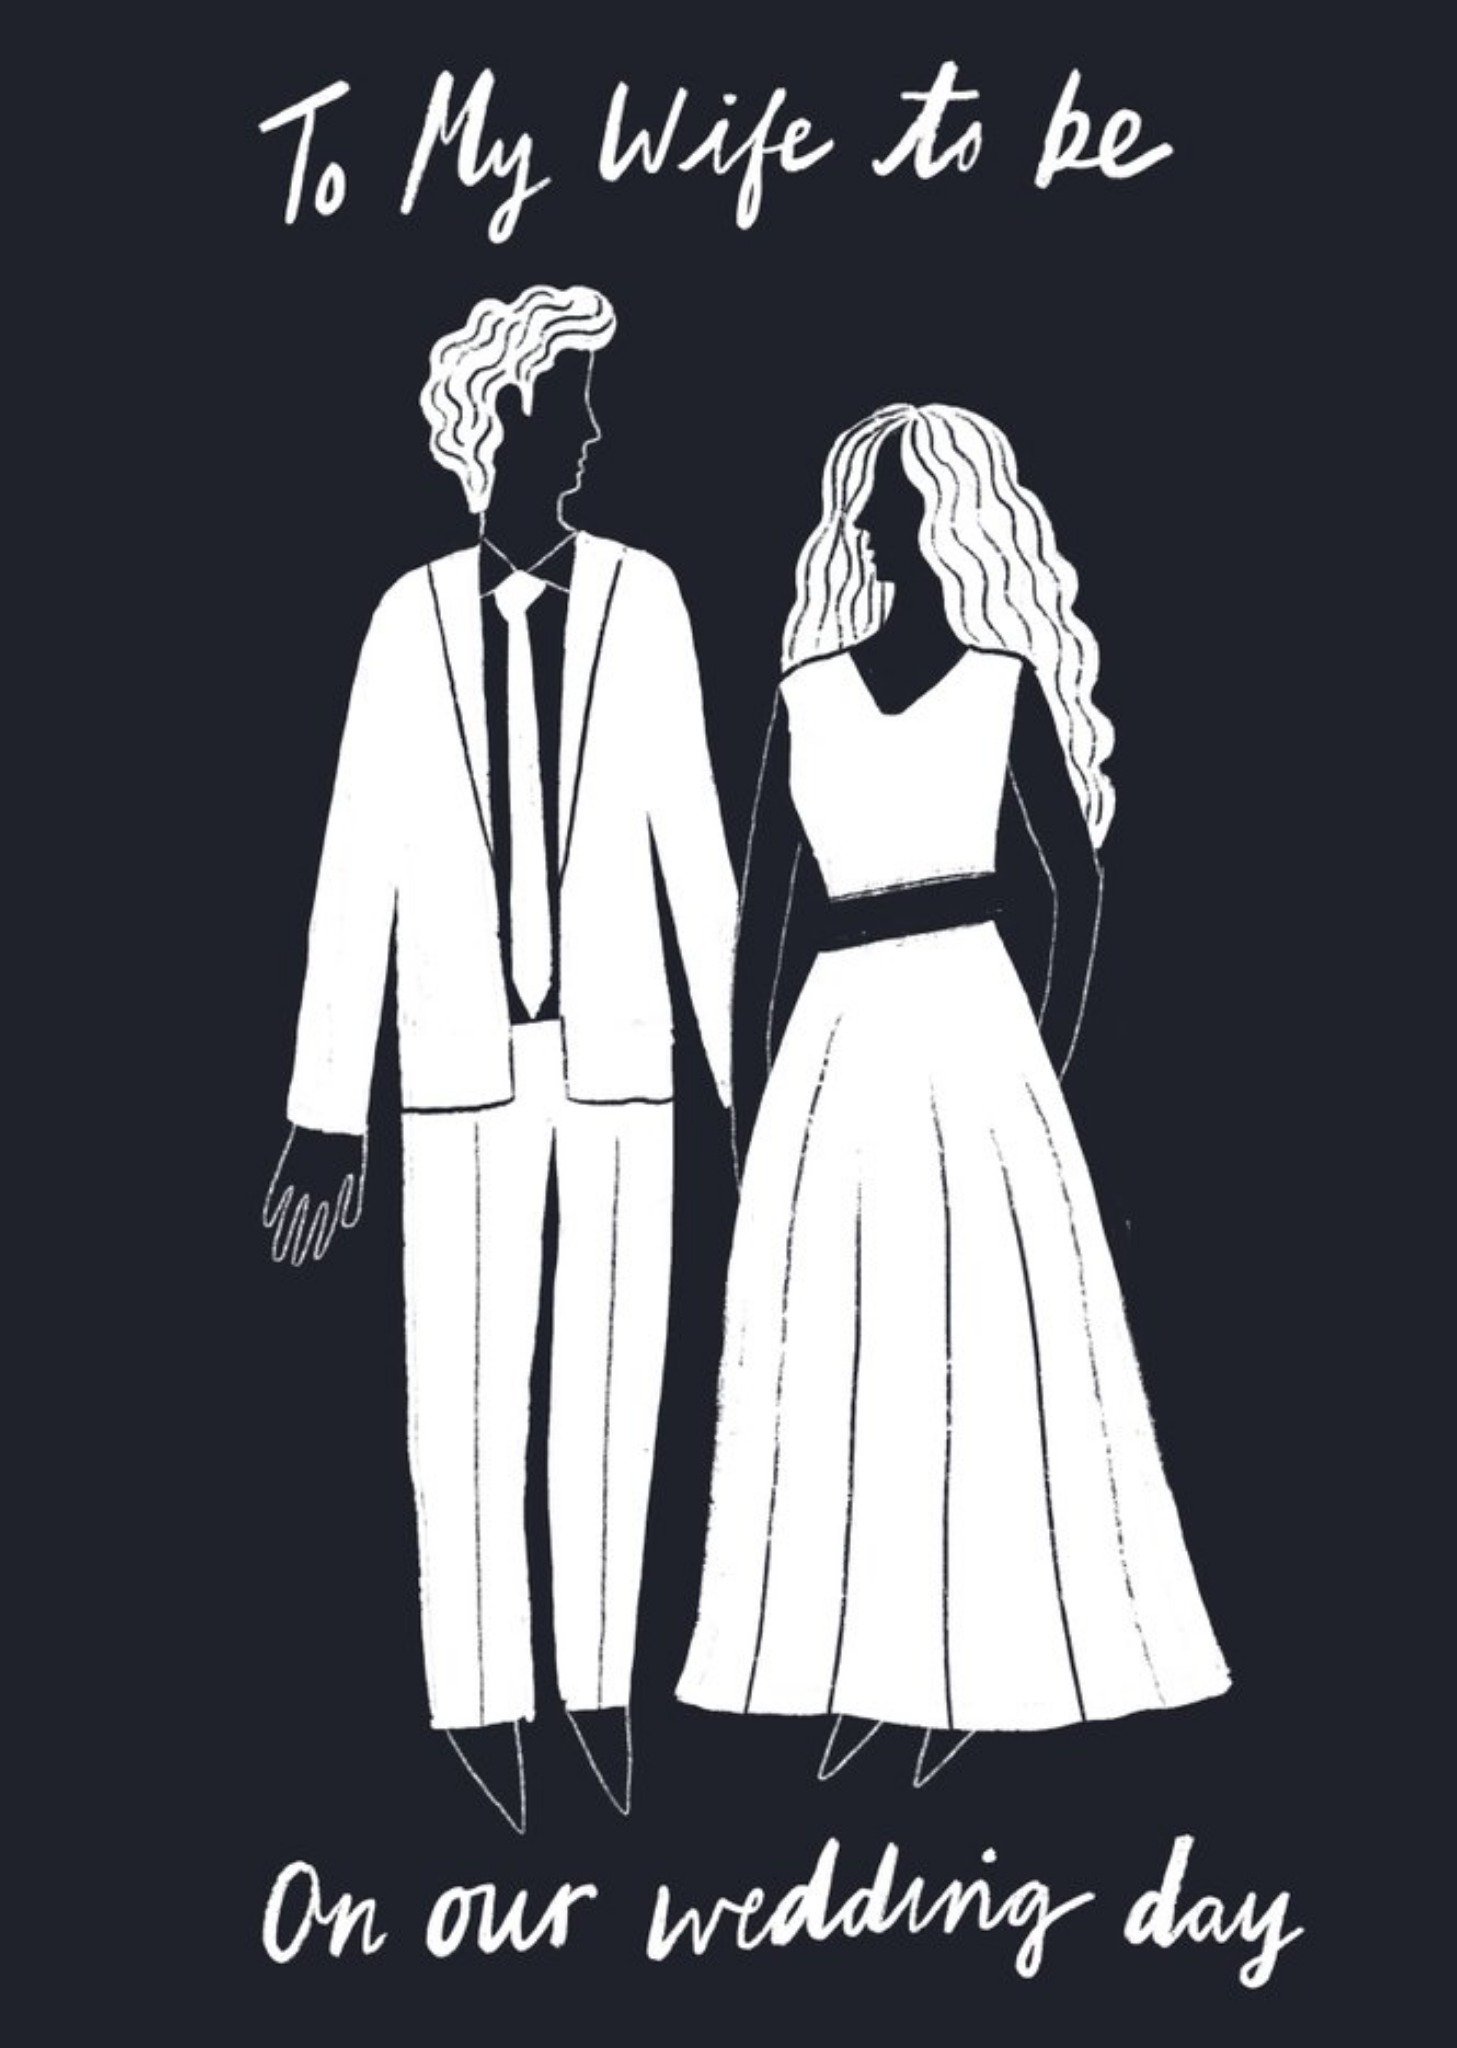 Moonpig Katy Welsh Illustration Of Married Couple In Black And White To My Wife To Be On Our Wedding